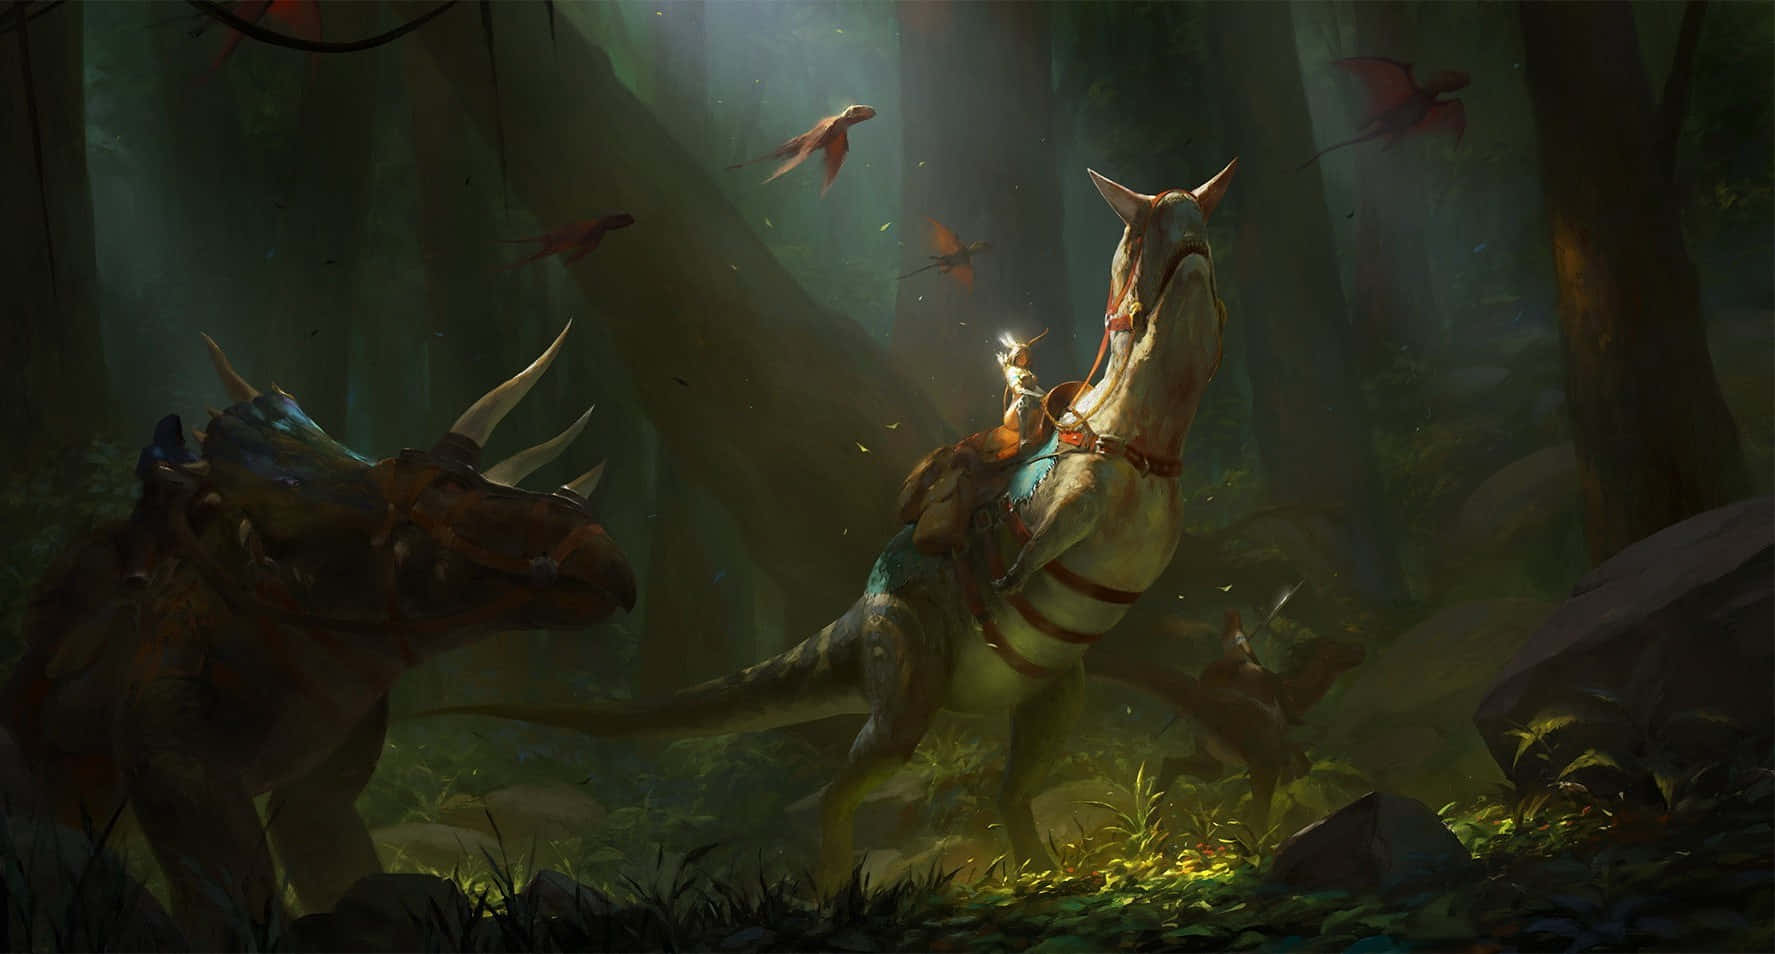 A Woman Riding A Dinosaur In The Forest Background